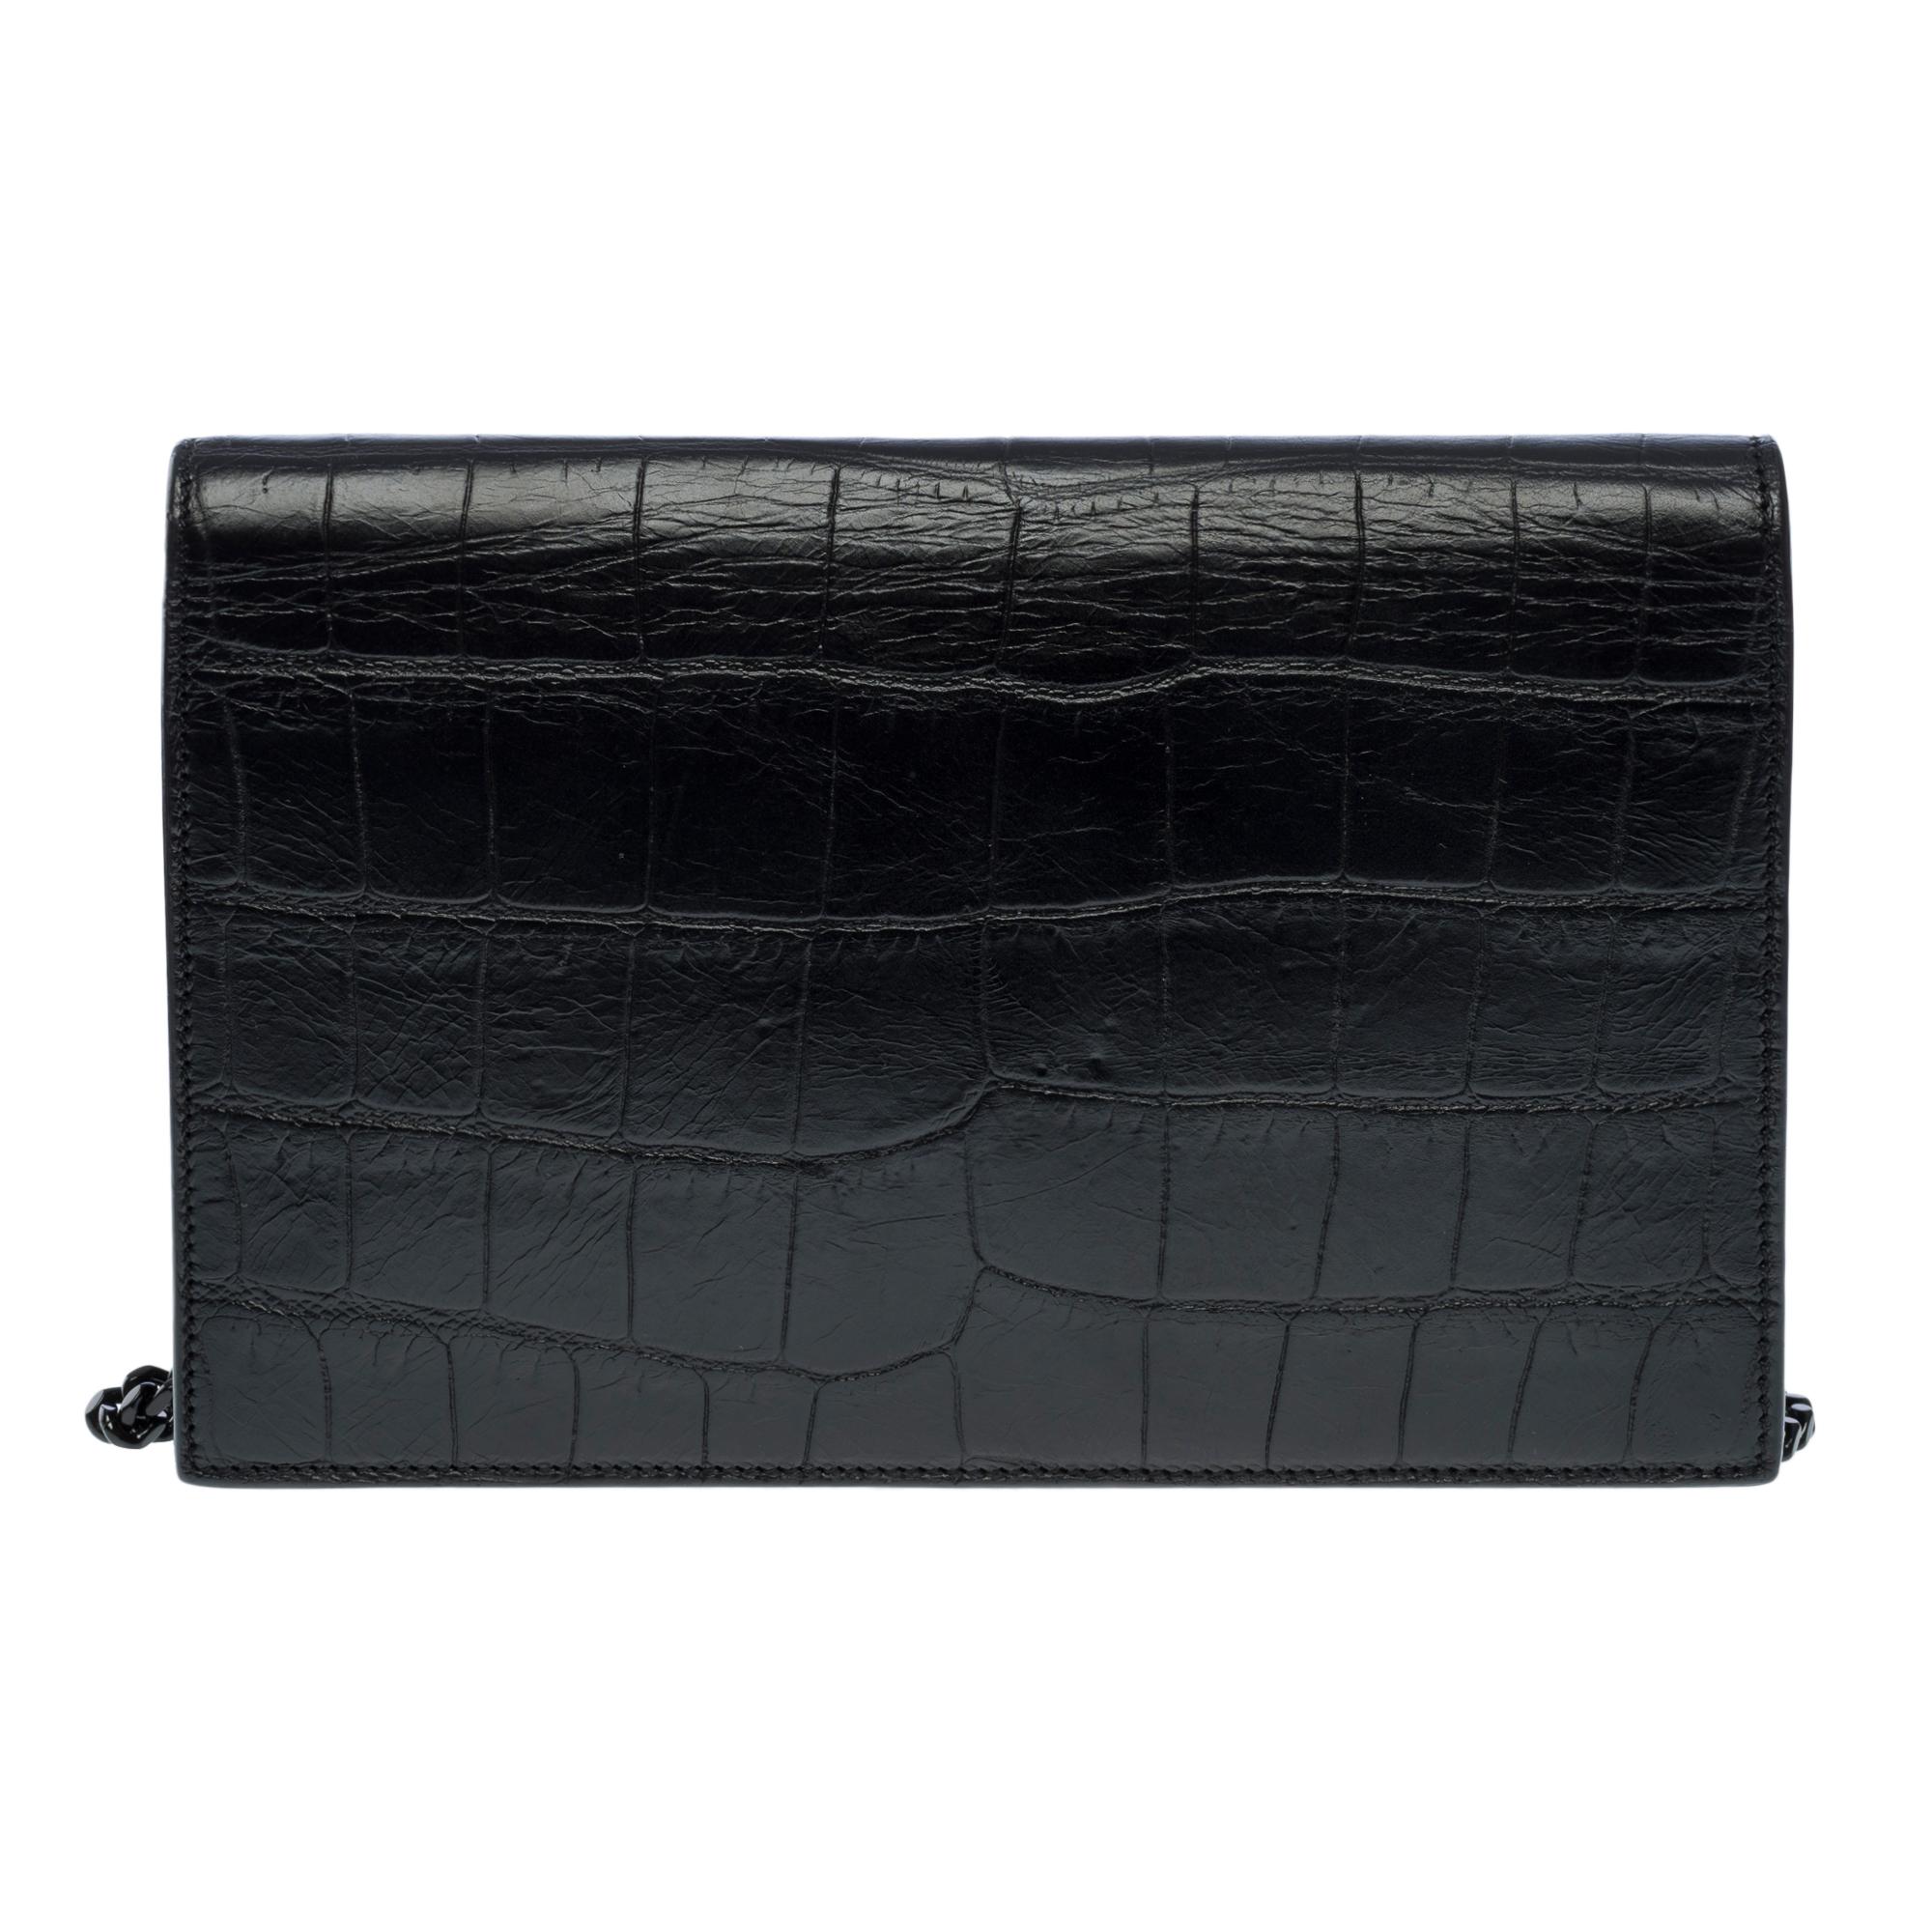 Women's New YSL Wallet Enveloppe in black leather printed crocodile , BHW For Sale